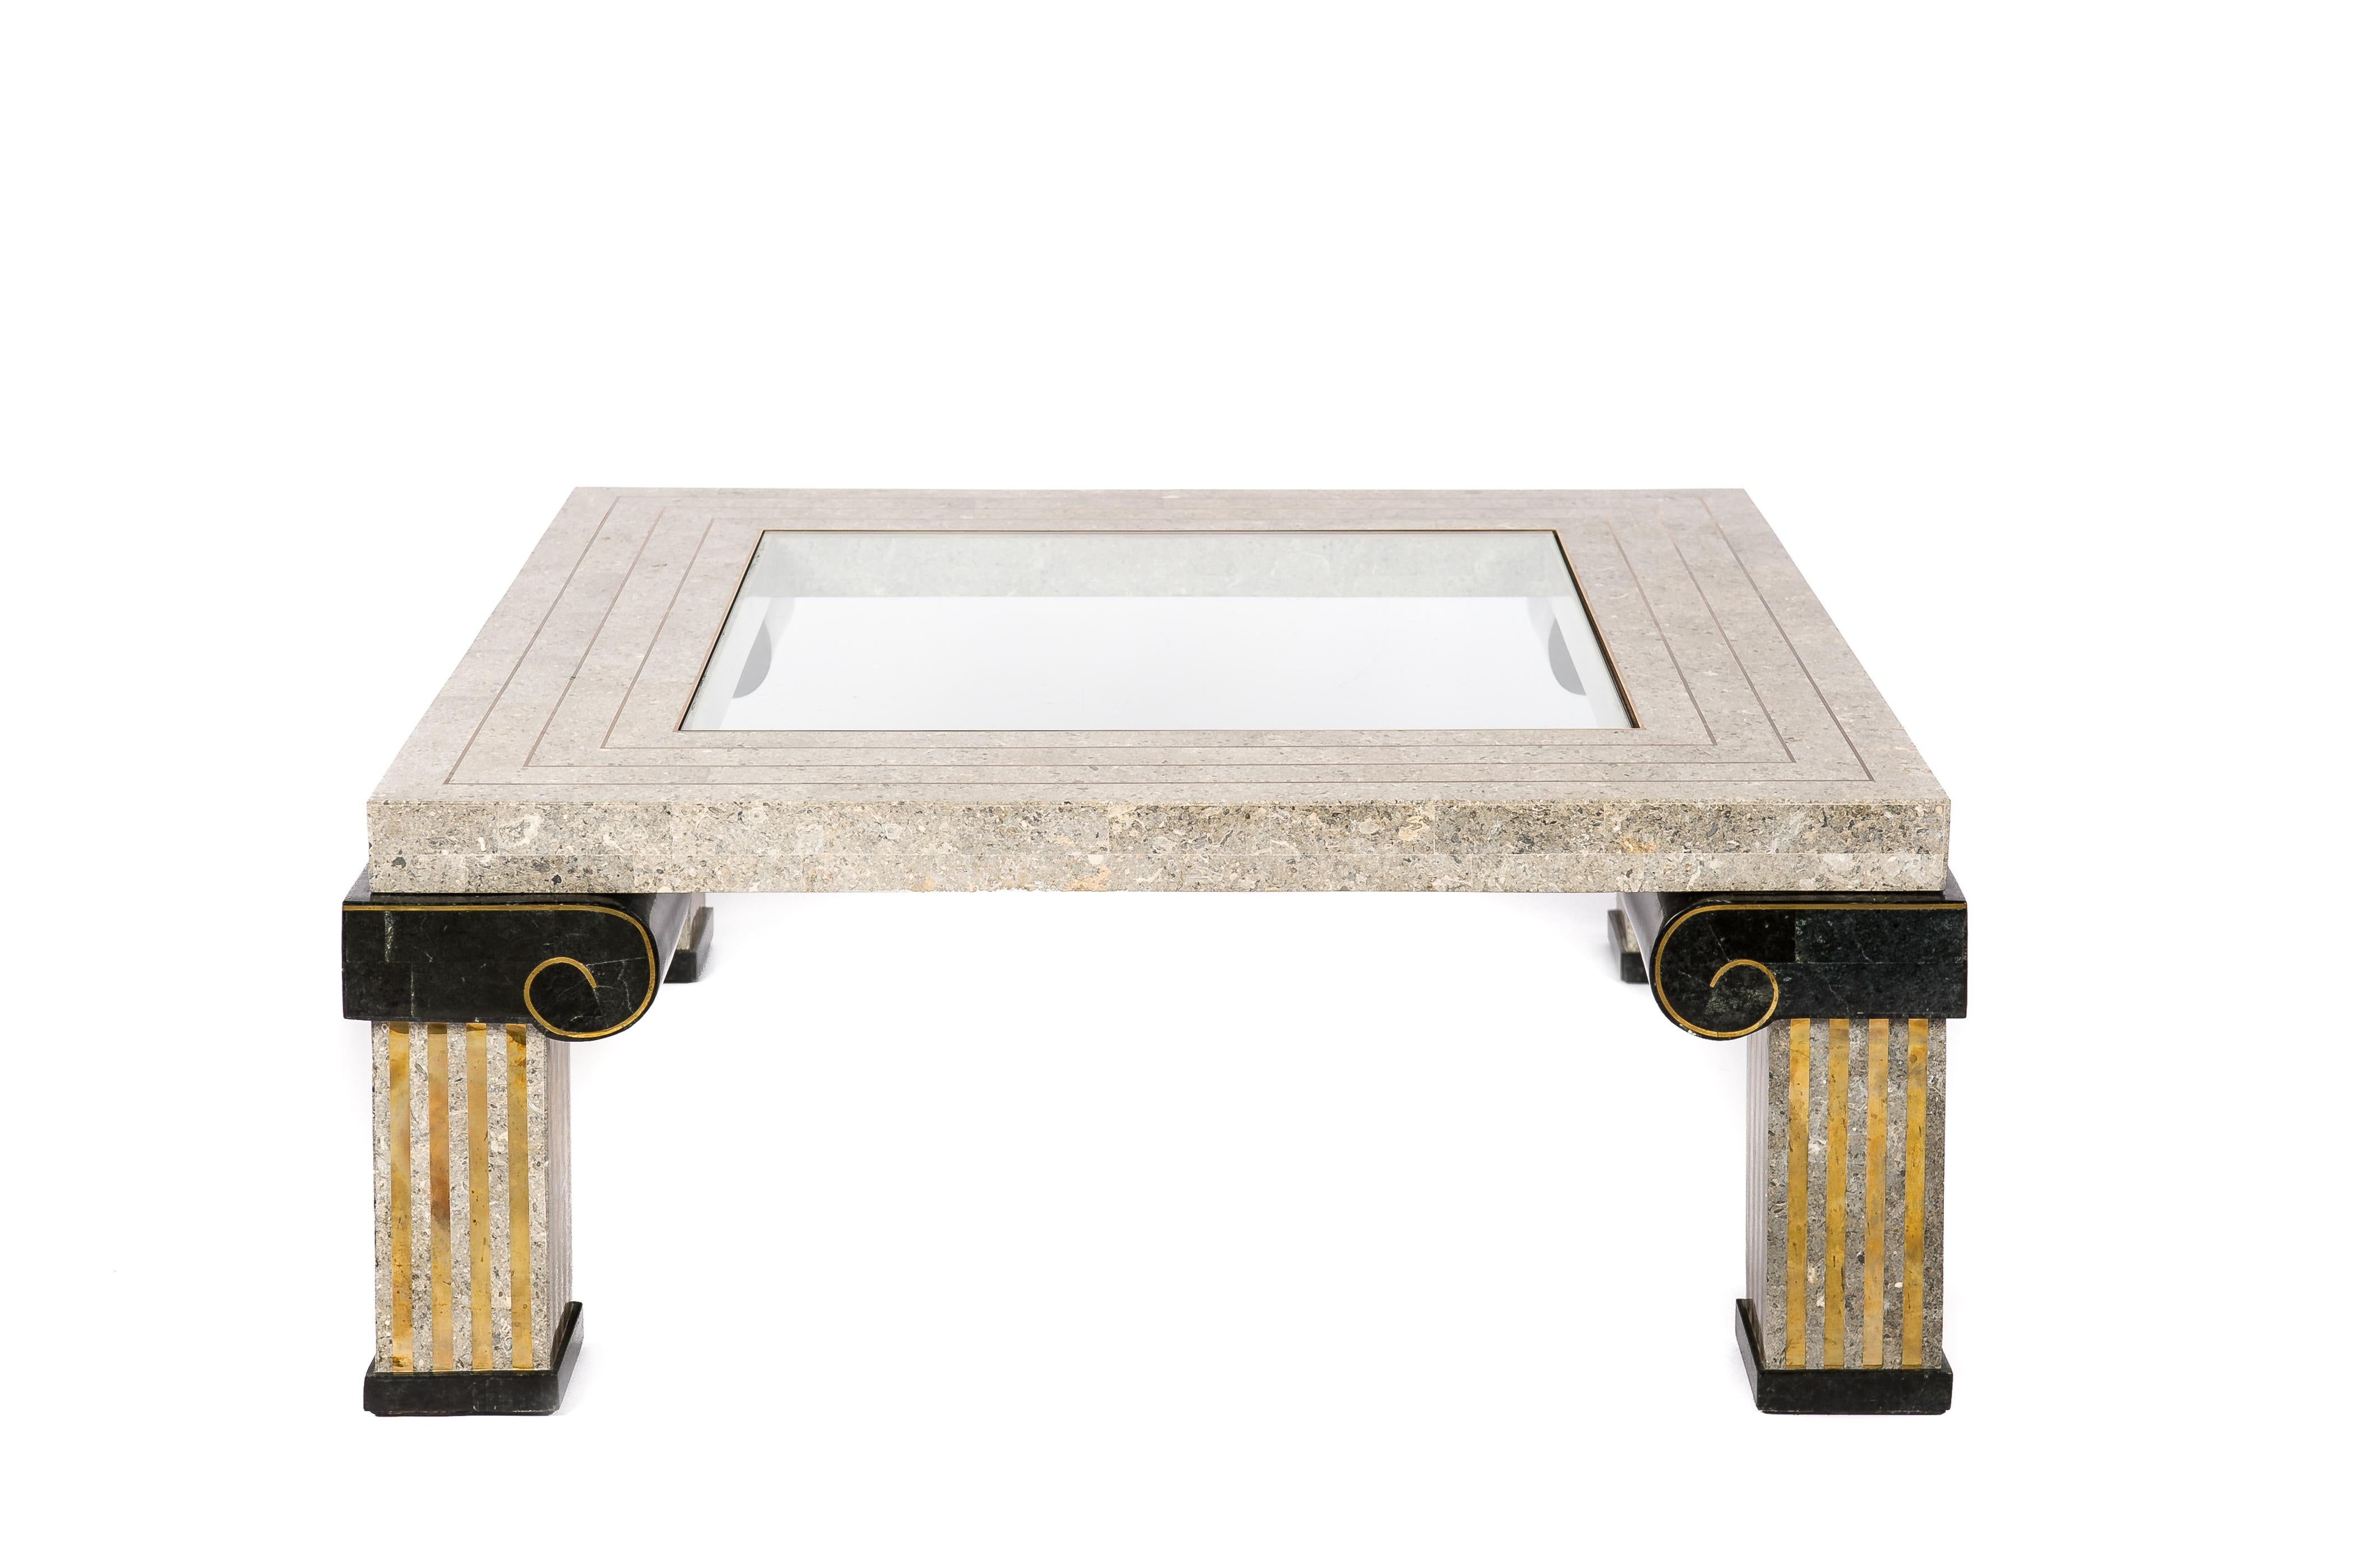 This beautifully handcrafted coffee table with a glass center panel and inlaid brass borders was made by Maitland Smith in the Philipines in the 1980s. It is a rare piece made in the neoclassical style with its ionic fluted pillars ending in a